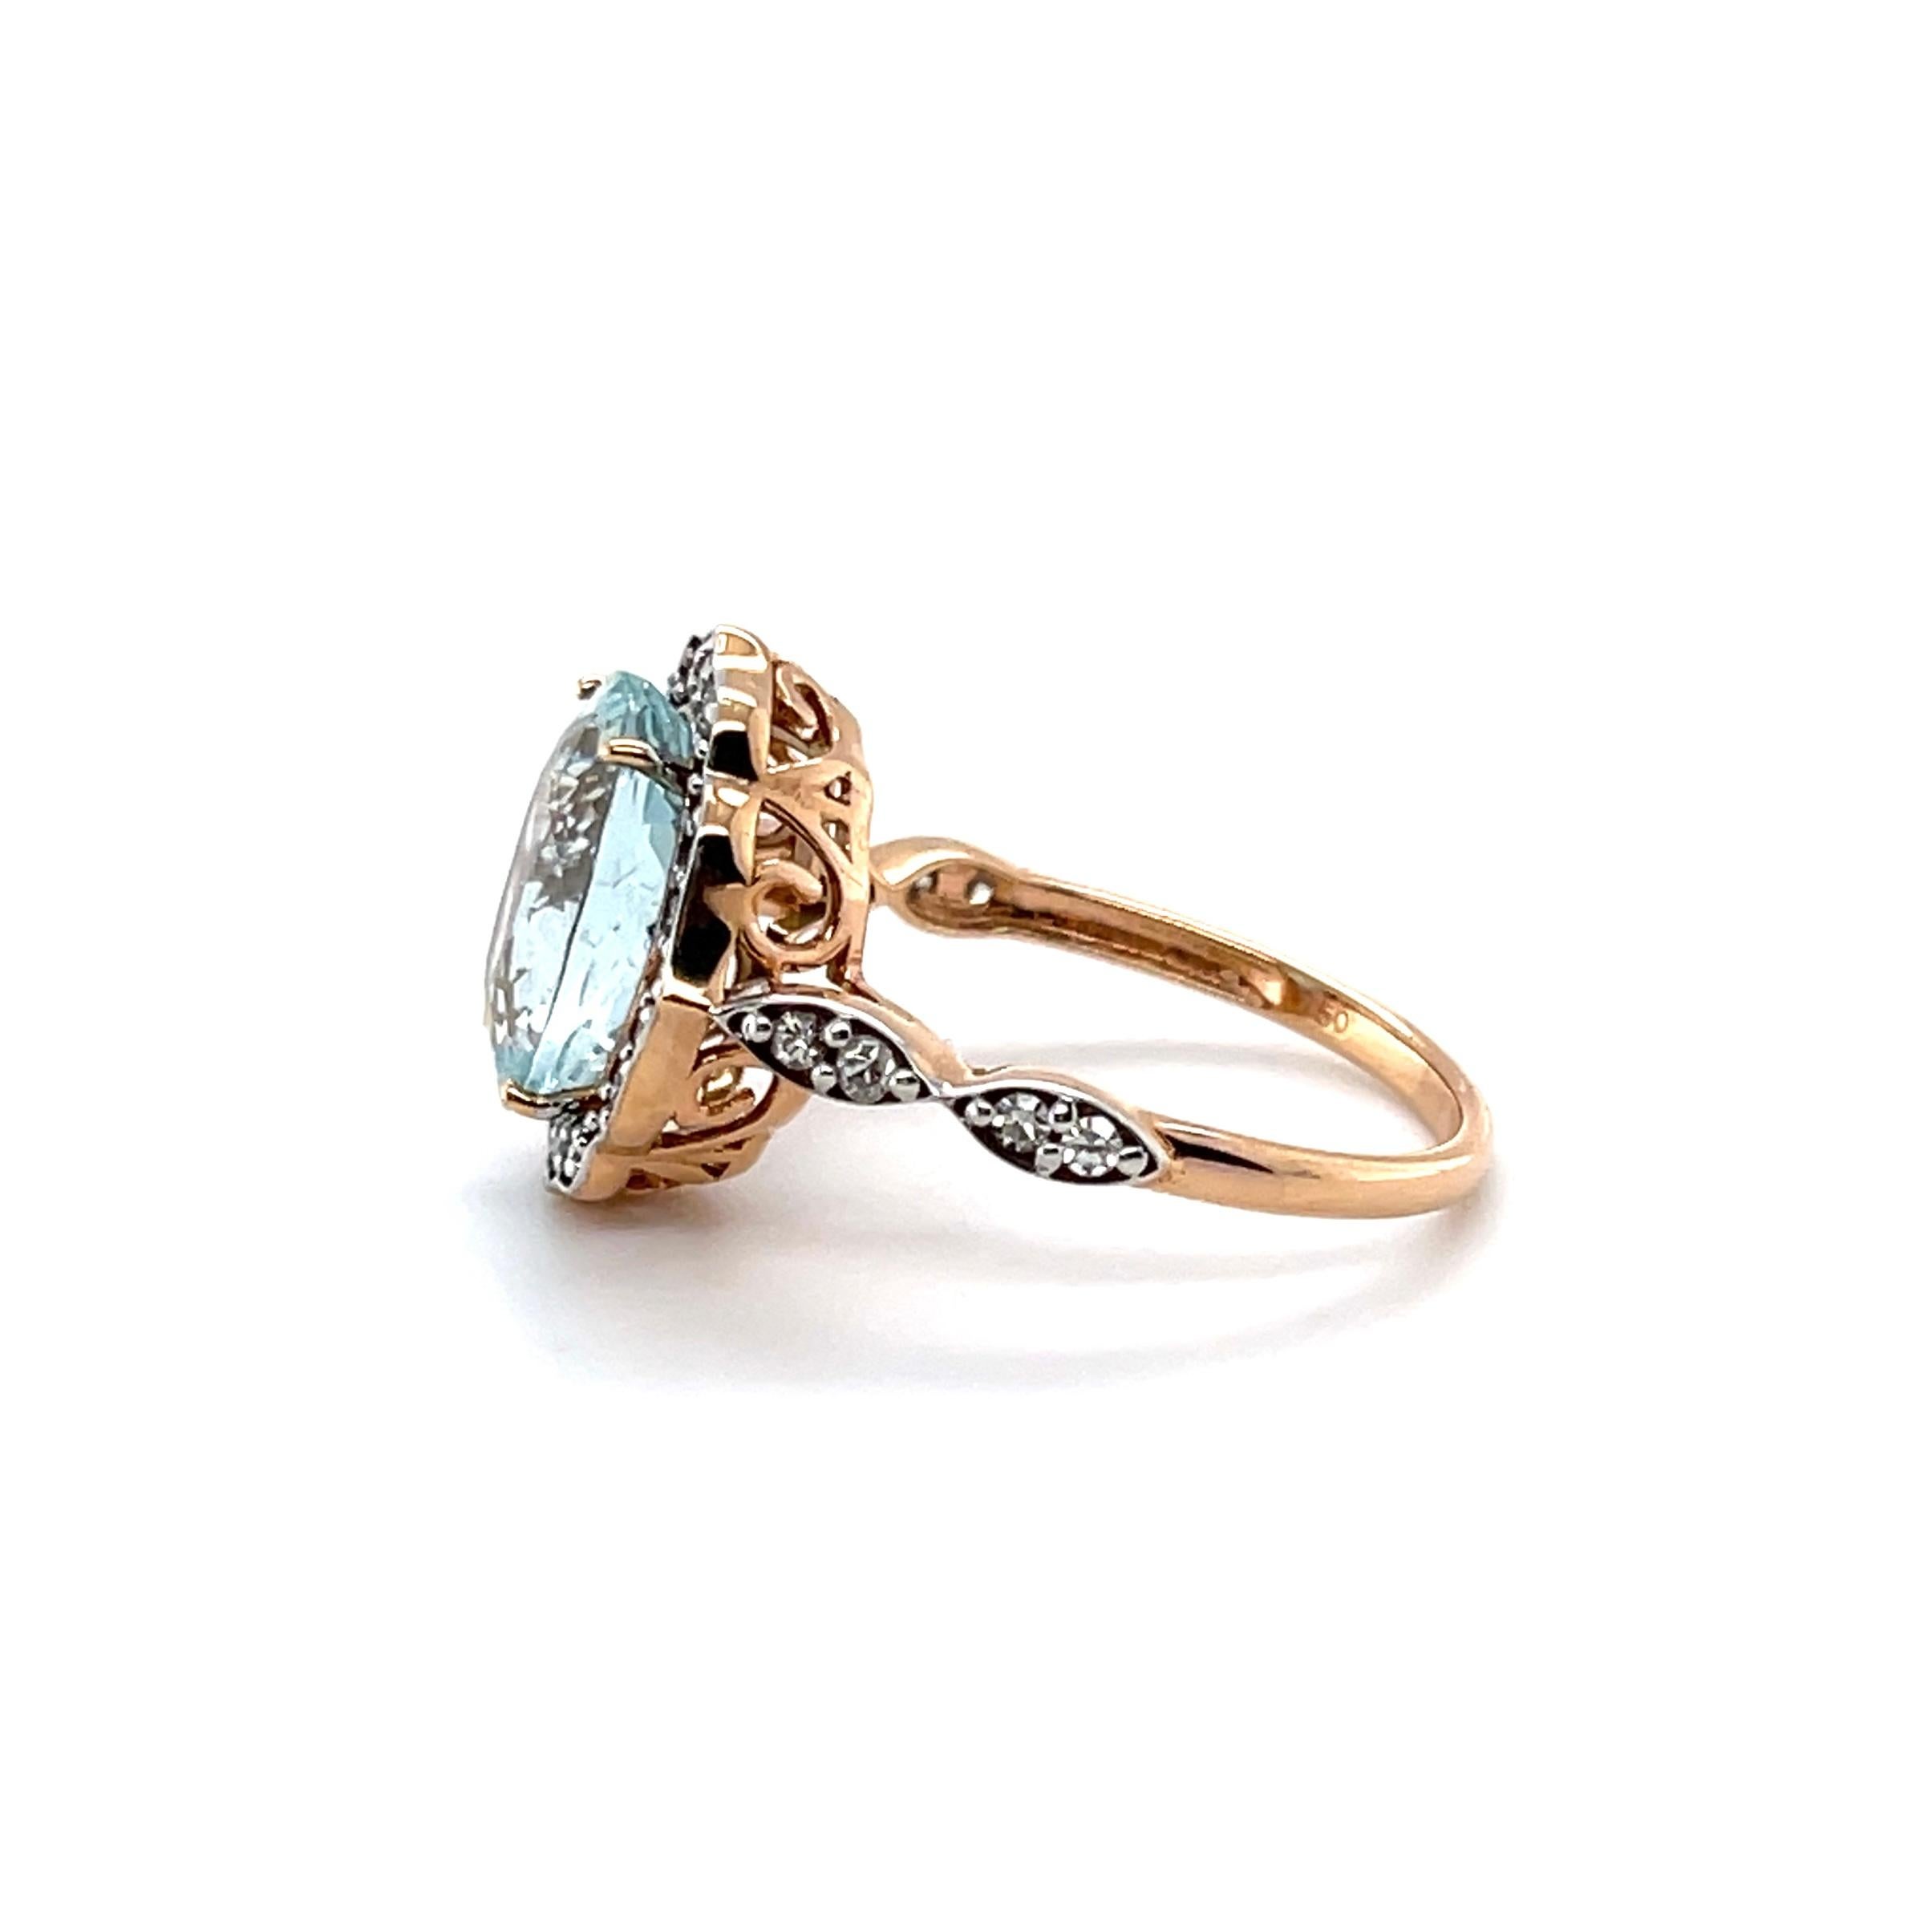 For Sale:  18ct Rose Gold Ring with 3.11ct Aquamarine and Diamond 3